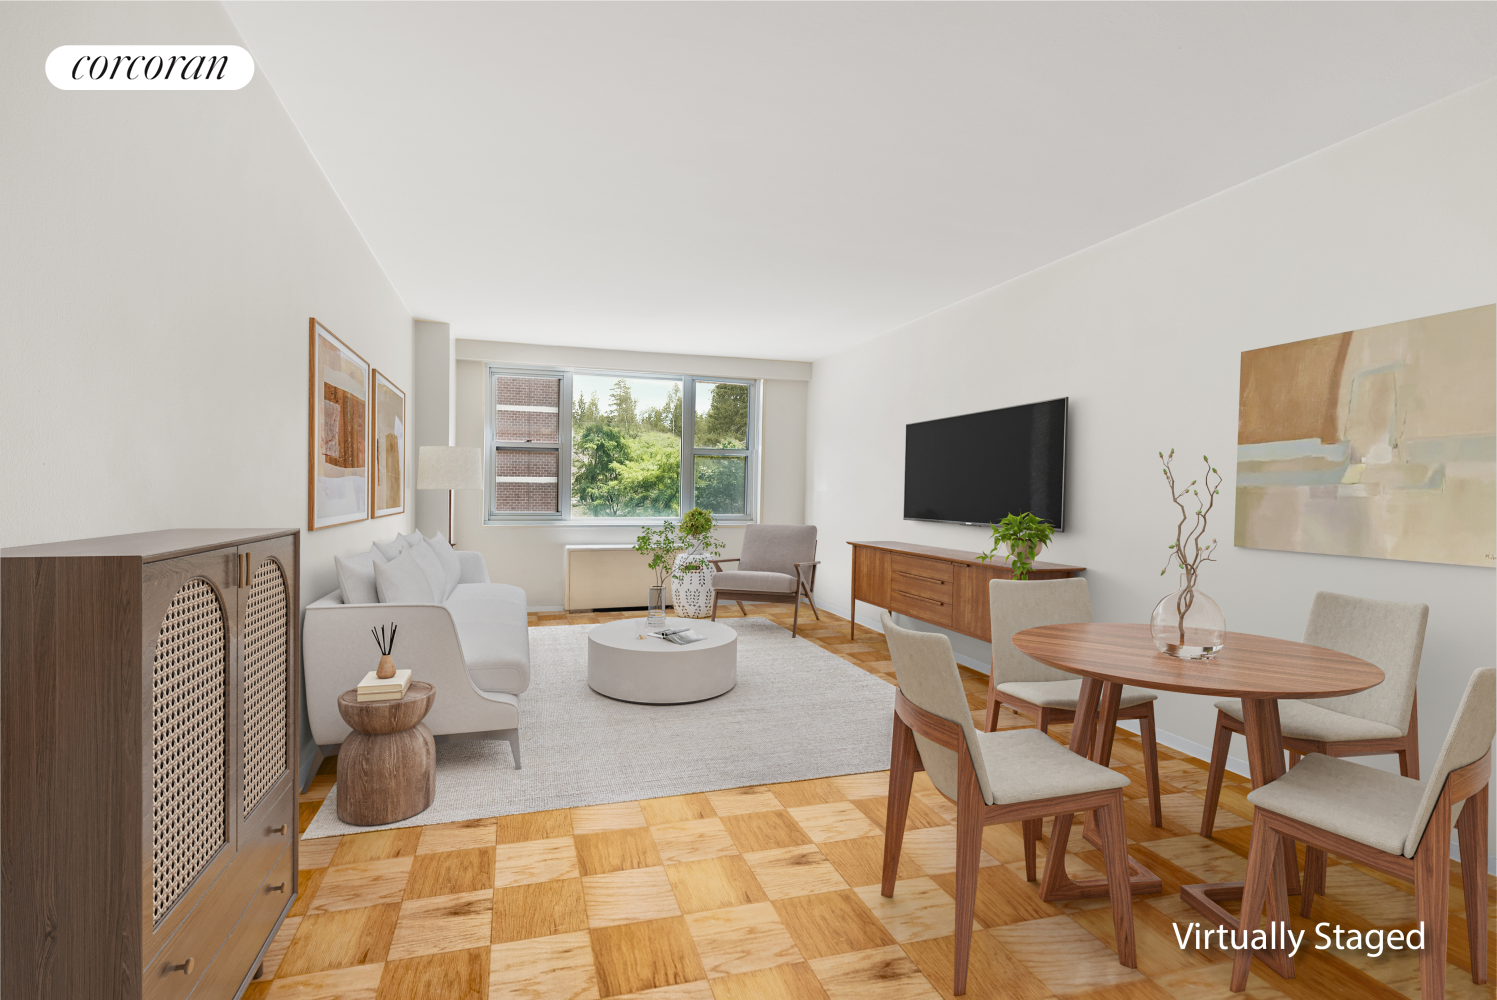 165 West 66th Street 7J, Lincoln Sq, Upper West Side, NYC - 2 Bedrooms  
1 Bathrooms  
6 Rooms - 